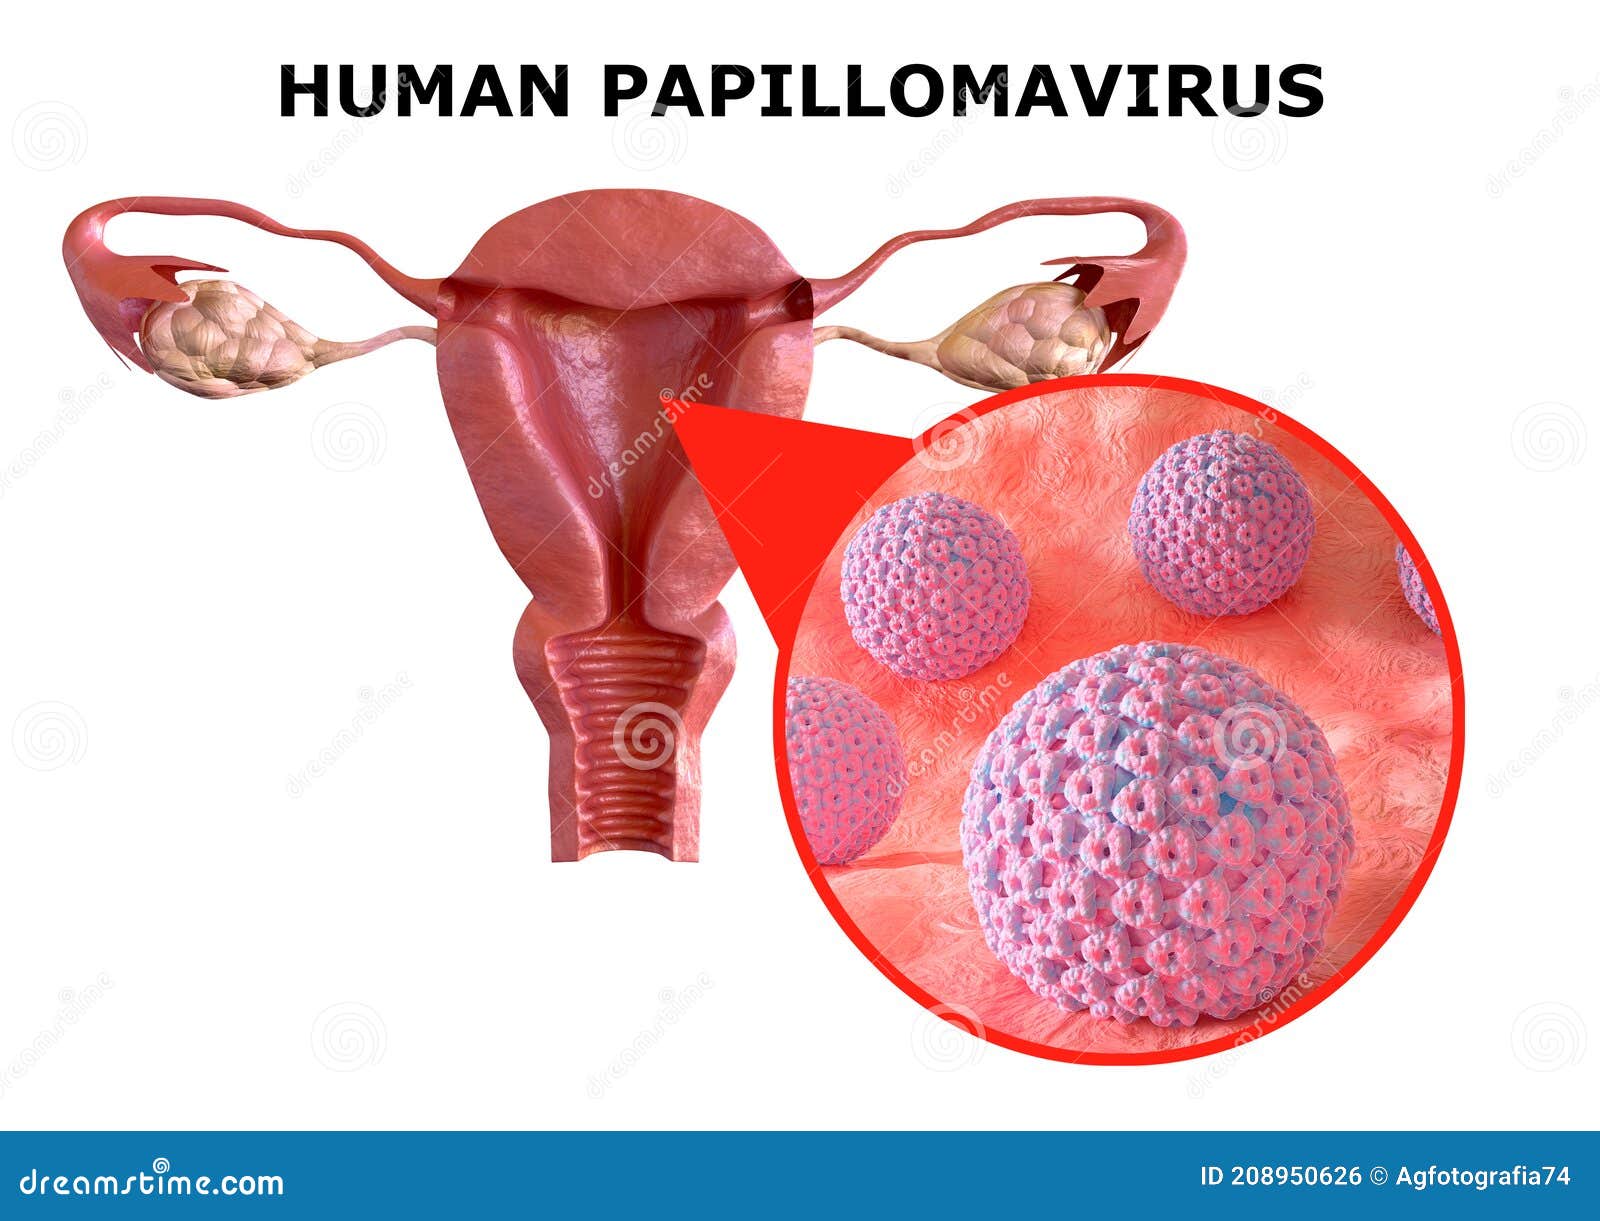 Hpv virus and donating blood Hpv virus and donating blood